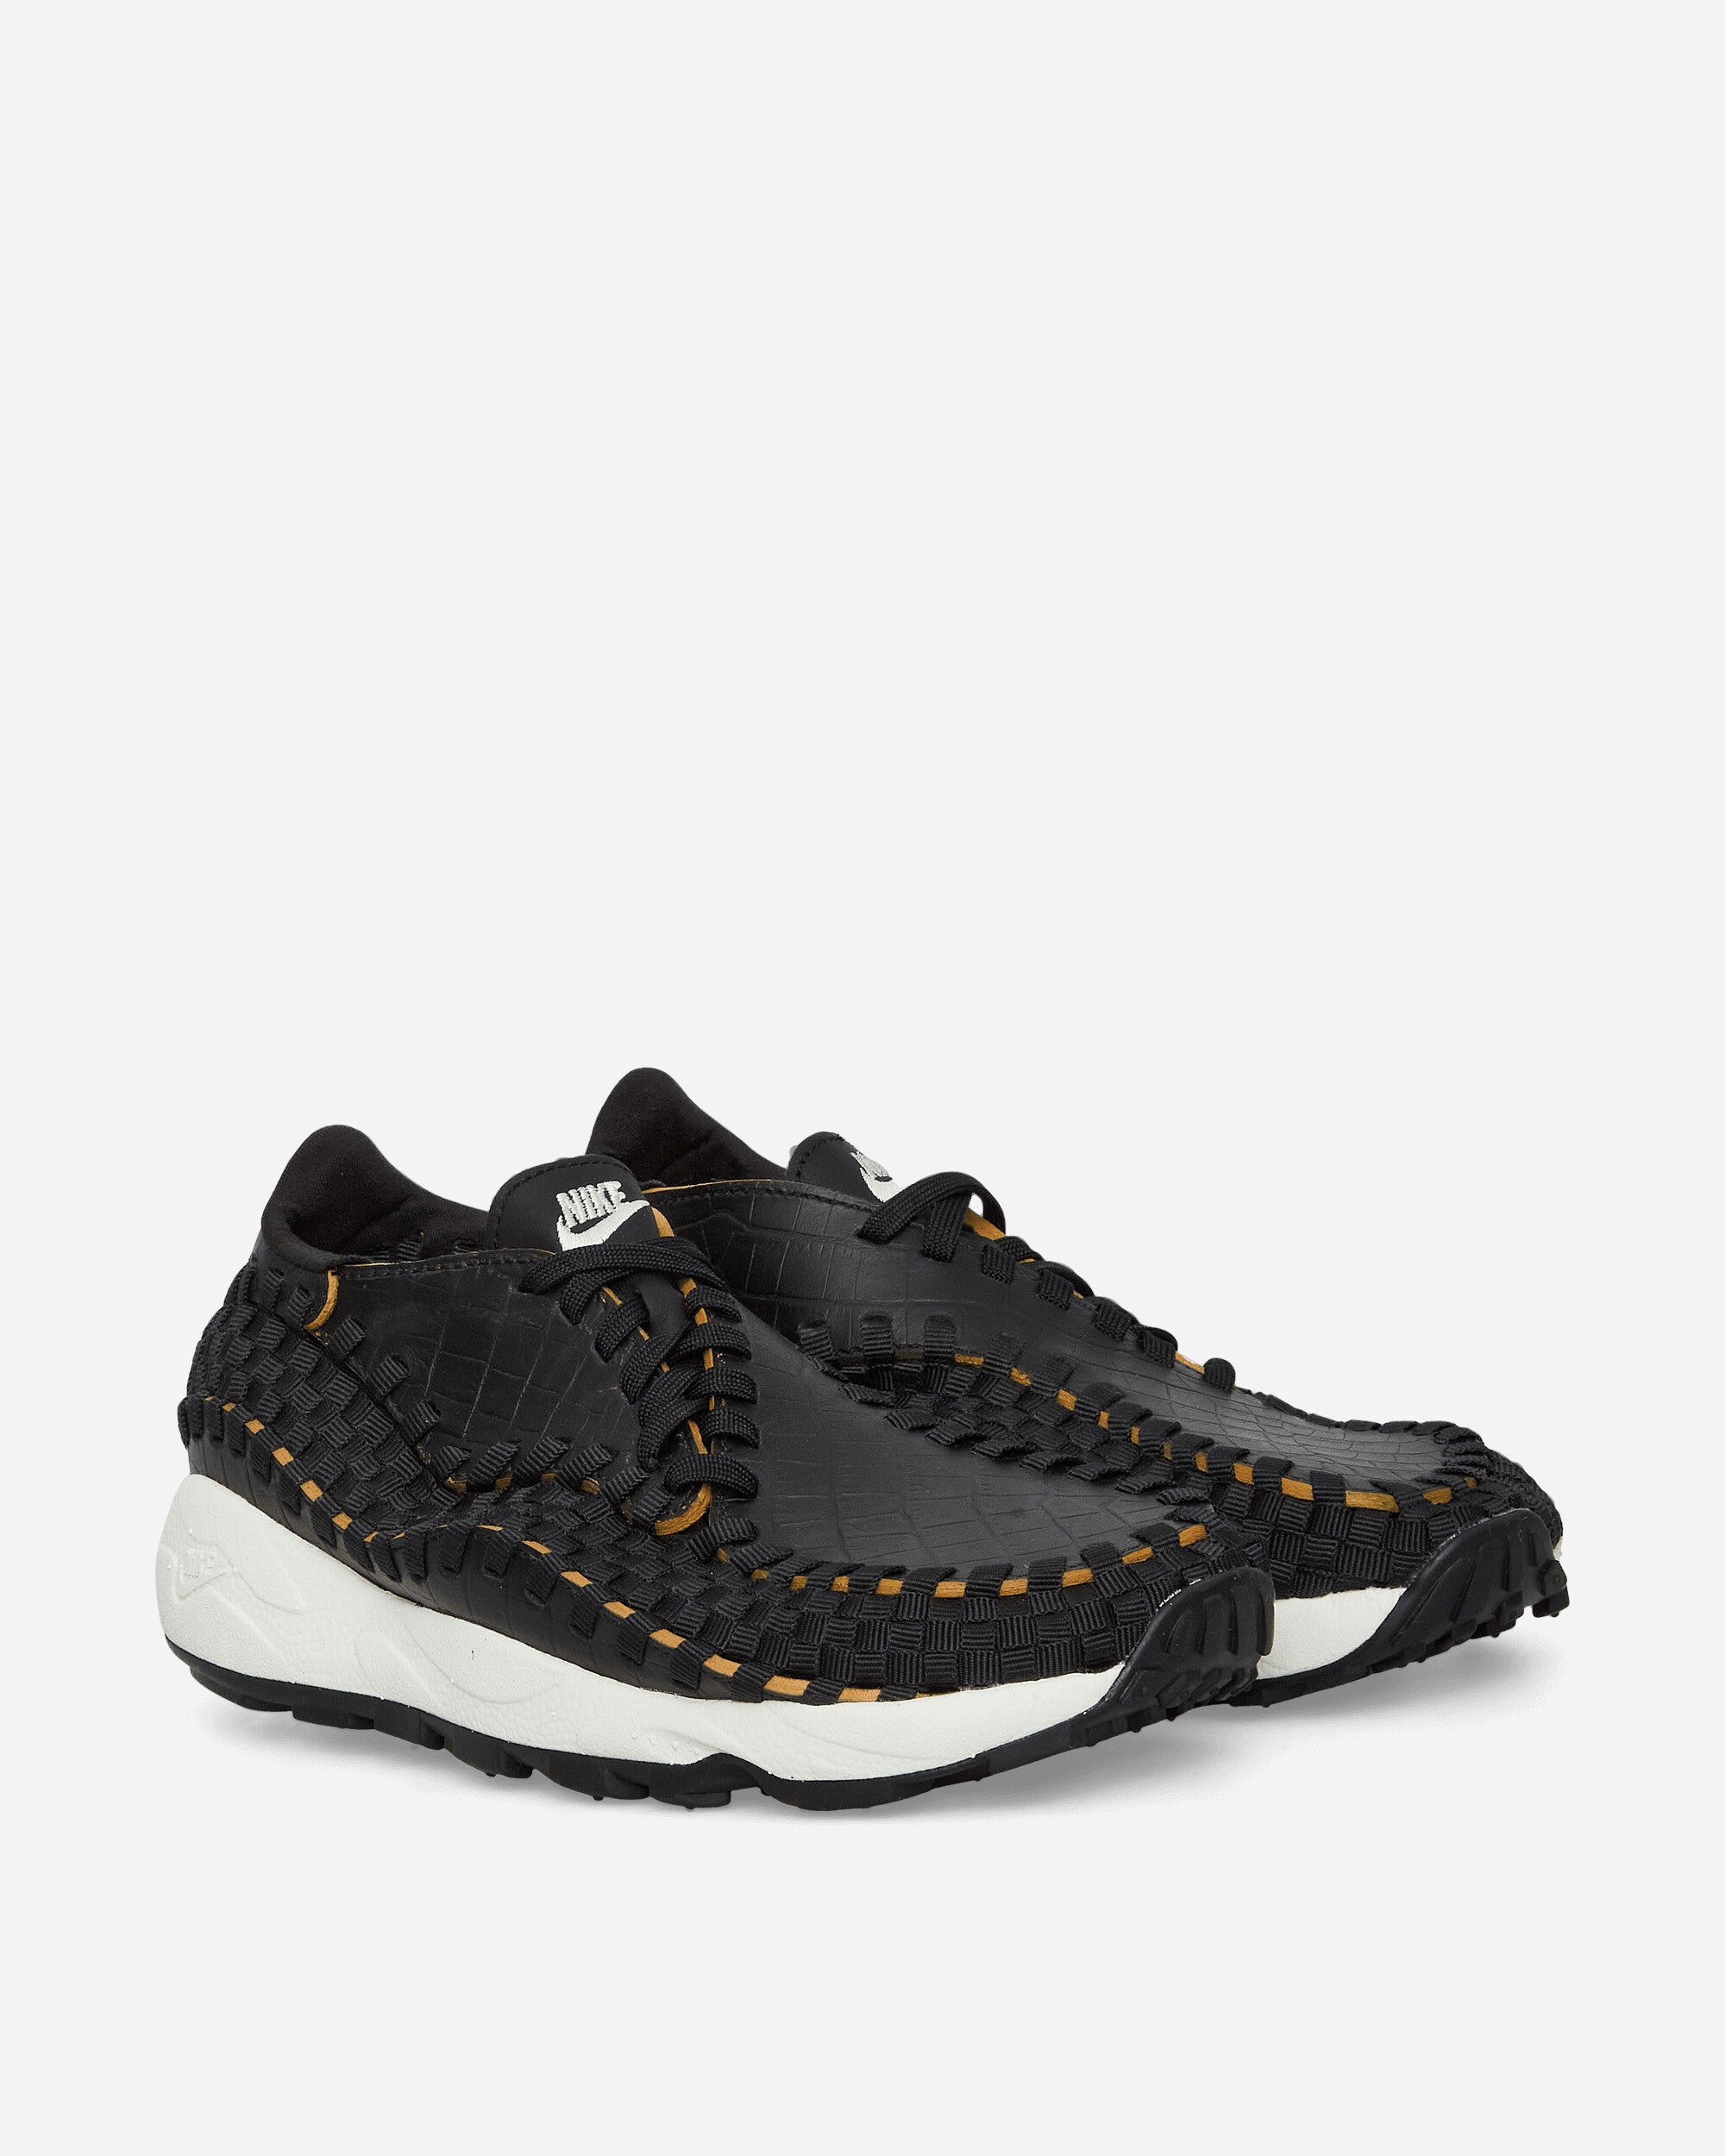 Nike Wmns Nike Air Footscape Woven Prm Black/Pale Ivory Sneakers Low FQ8129-010